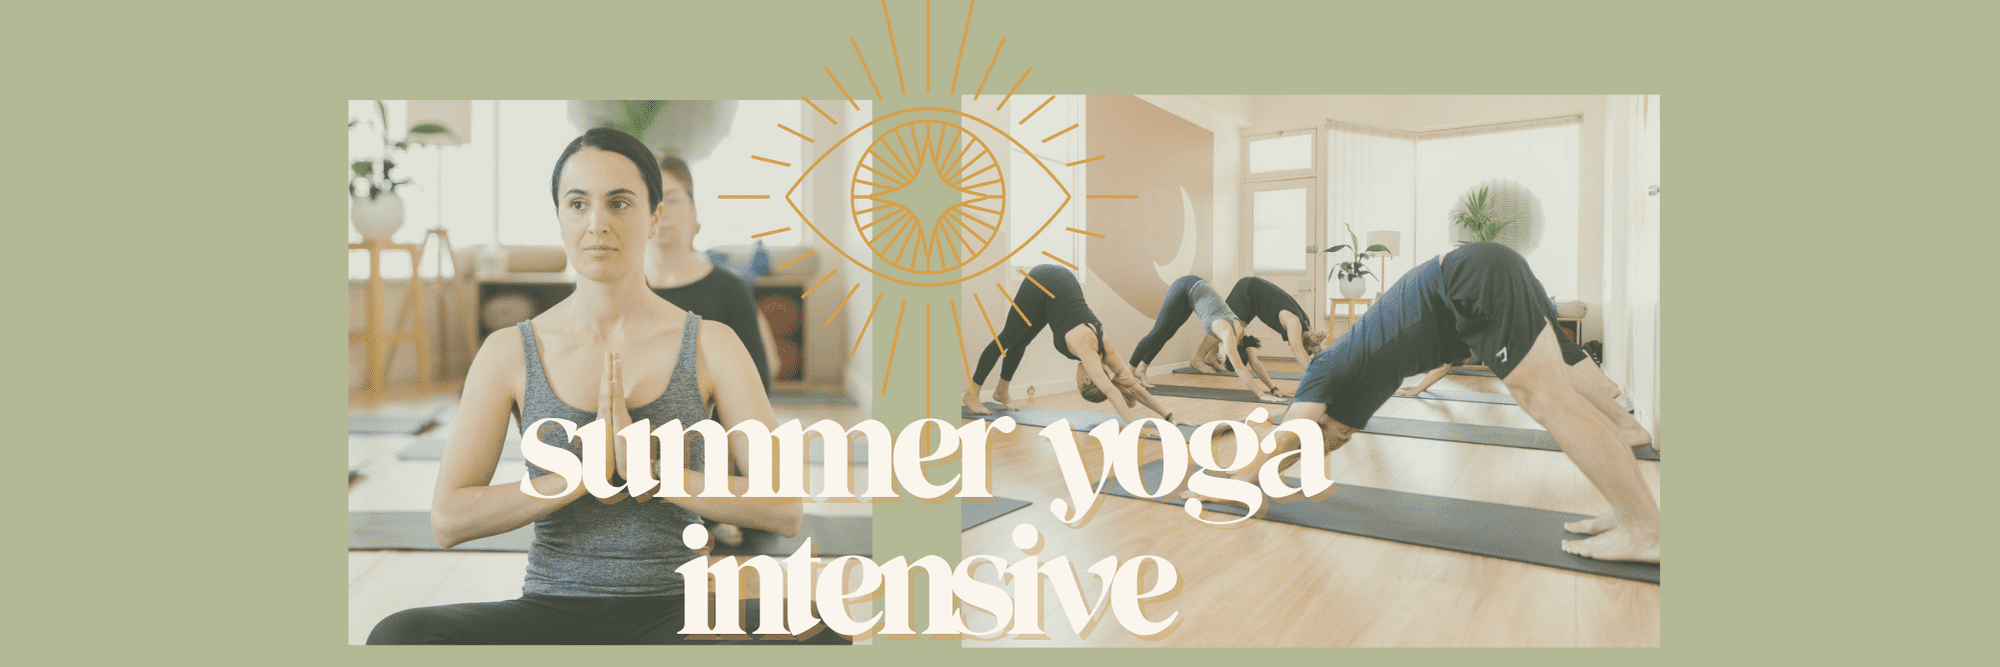 Summer intensive (Facebook Event Cover) (Facebook Cover) (Email Header) (20 x 6.667 cm)